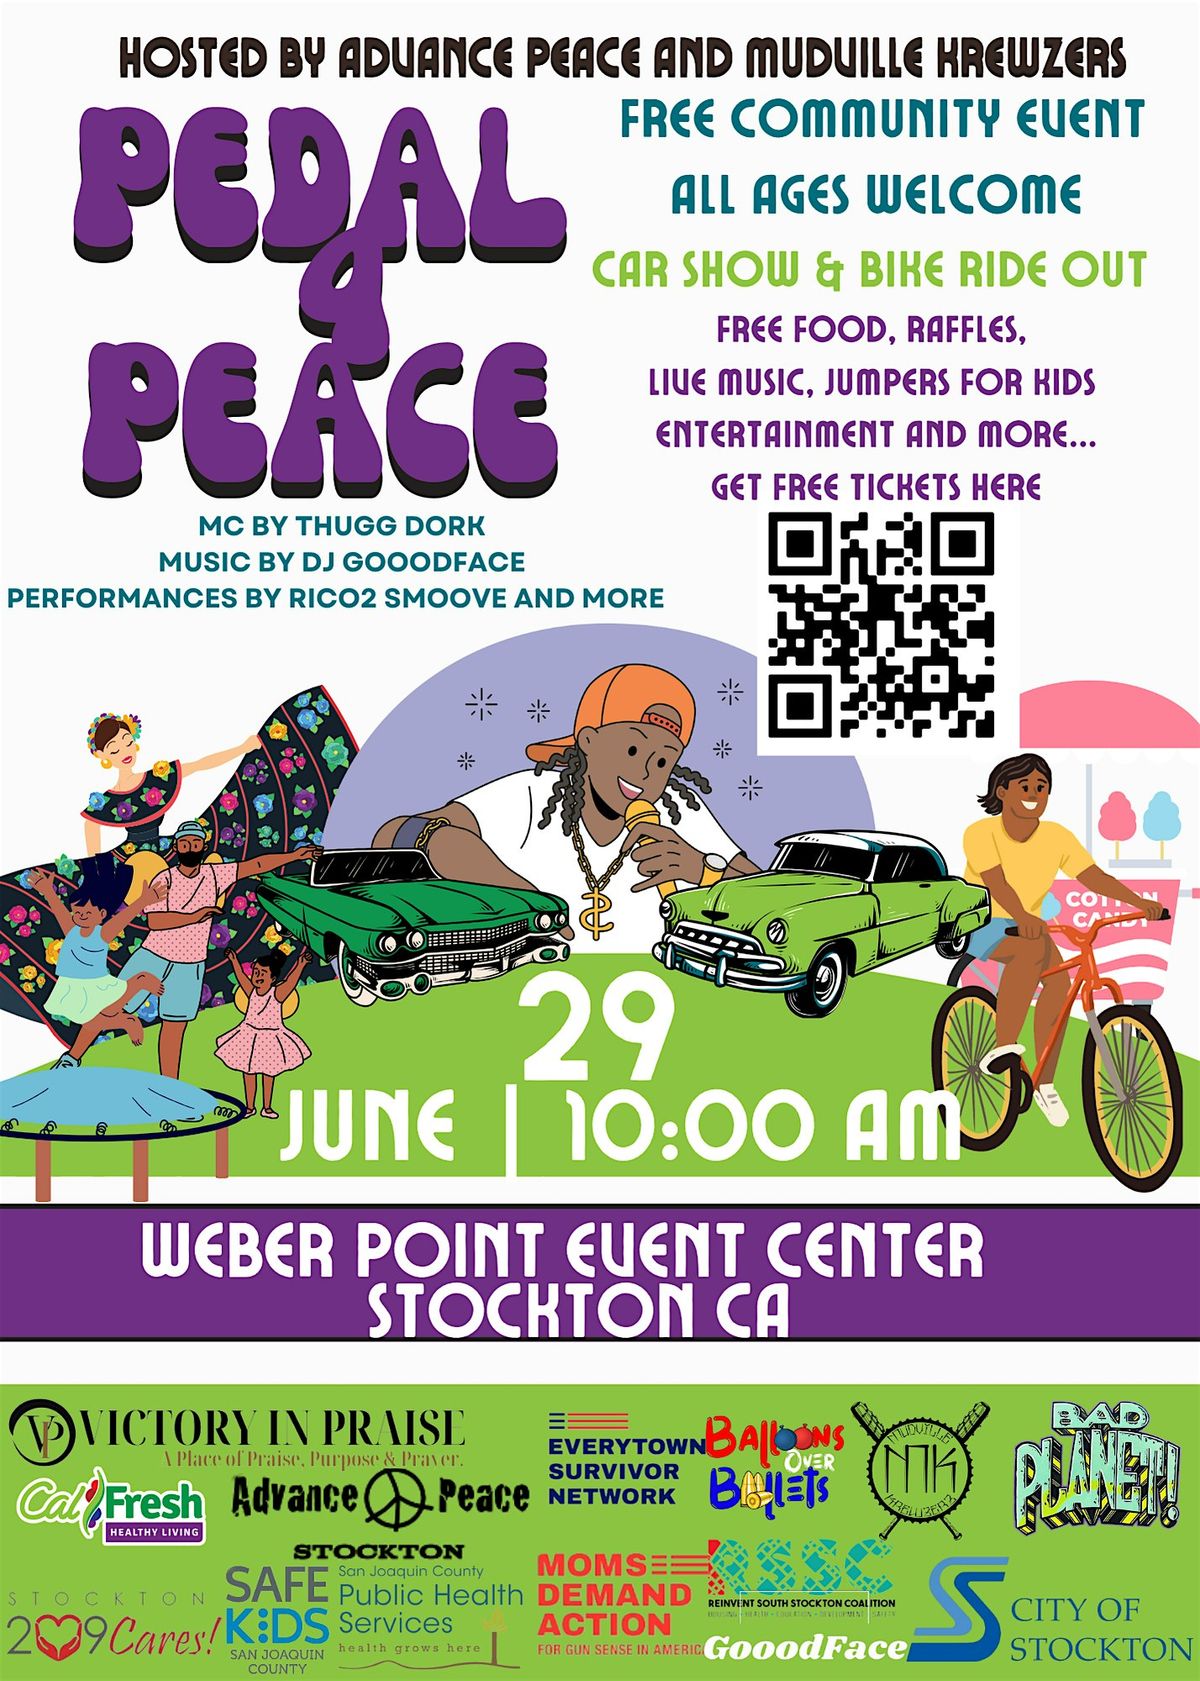 Pedal for Peace